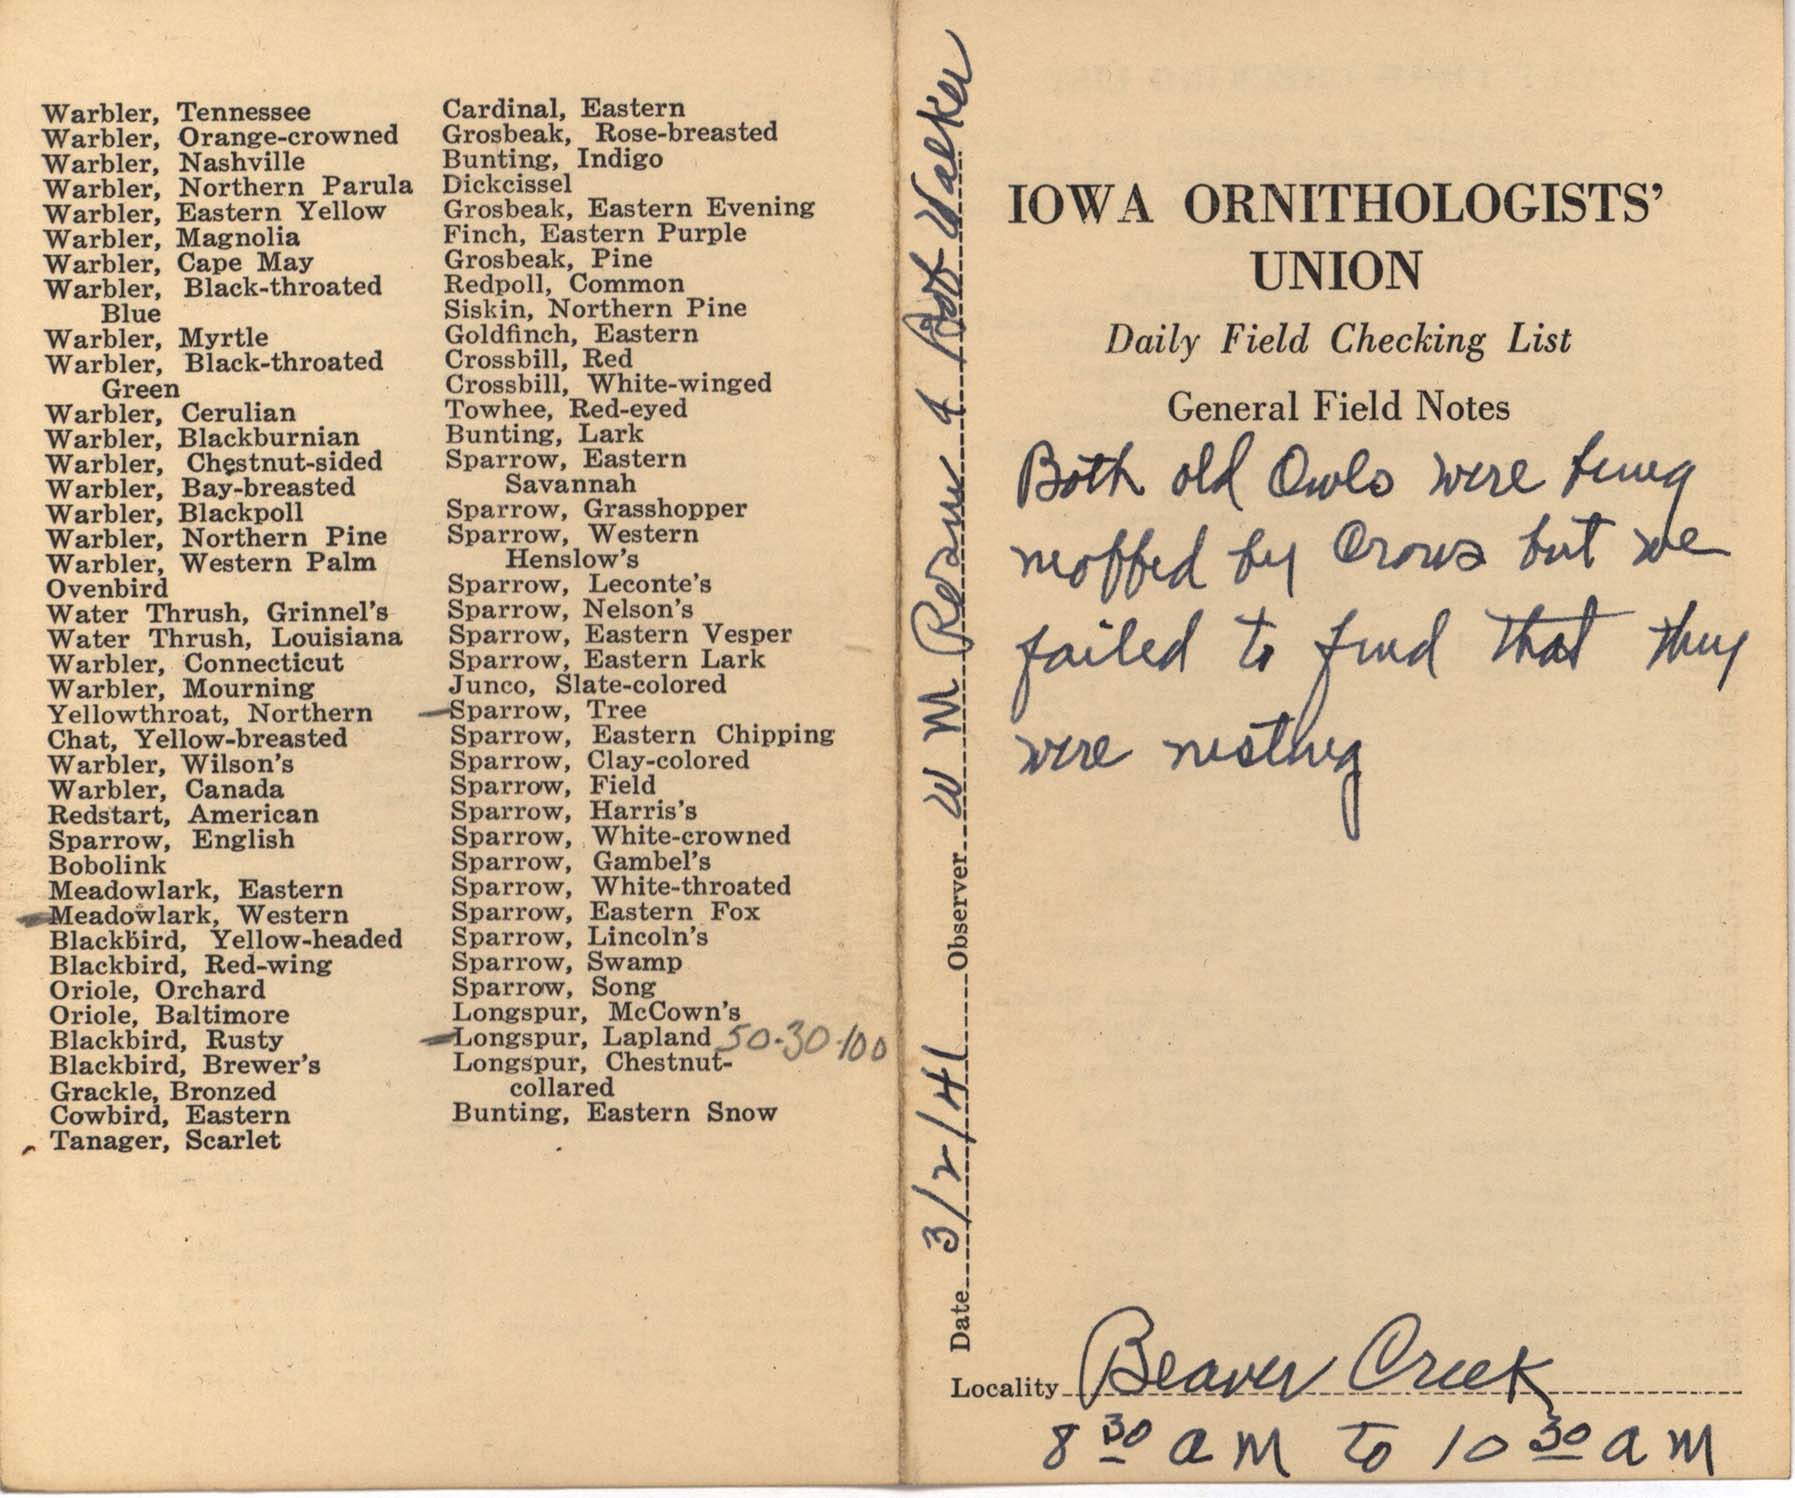 Daily field checking list by Walter Rosene, March 2, 1941